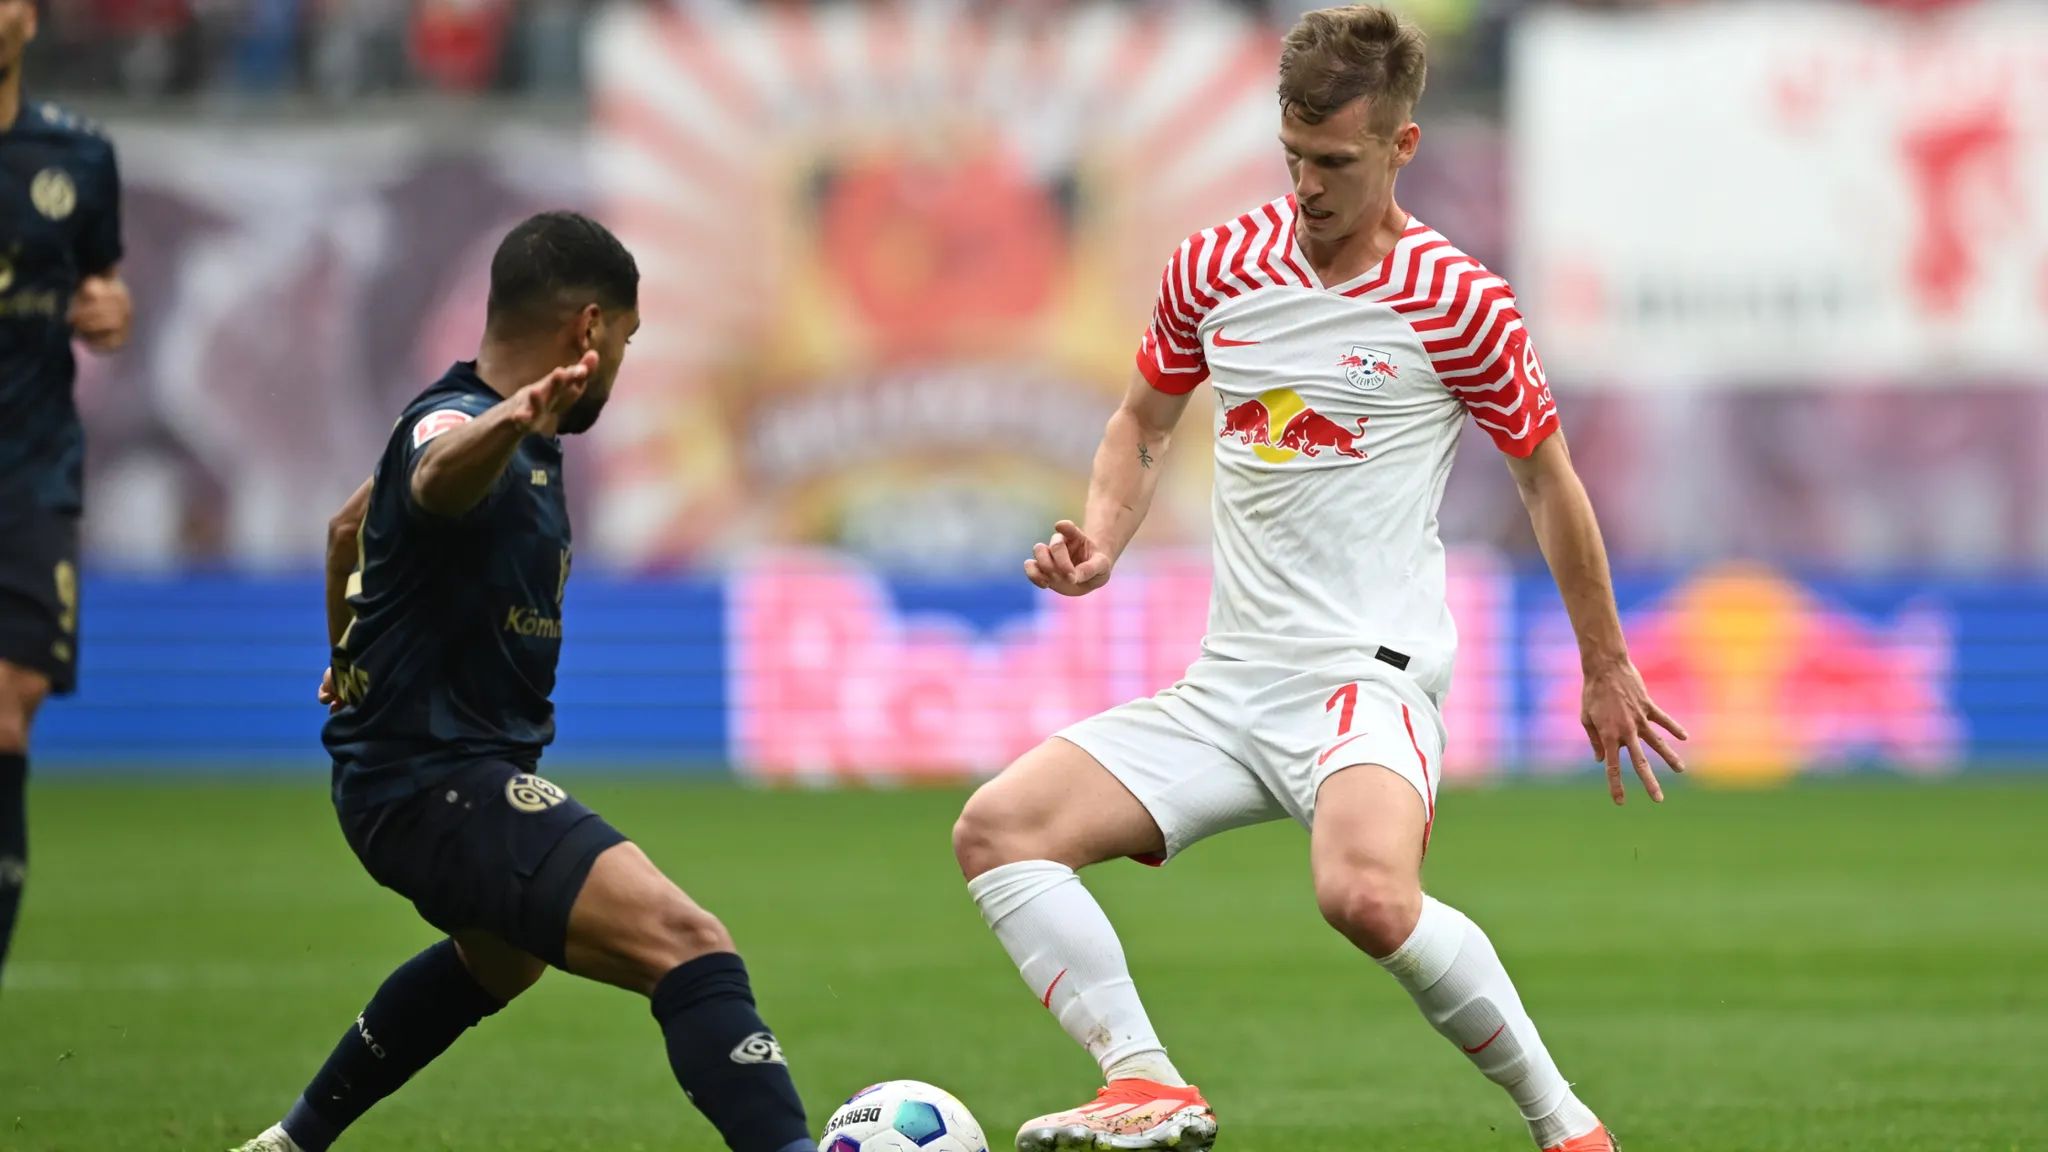 Dani Olmo goes past a Mainz opponent.